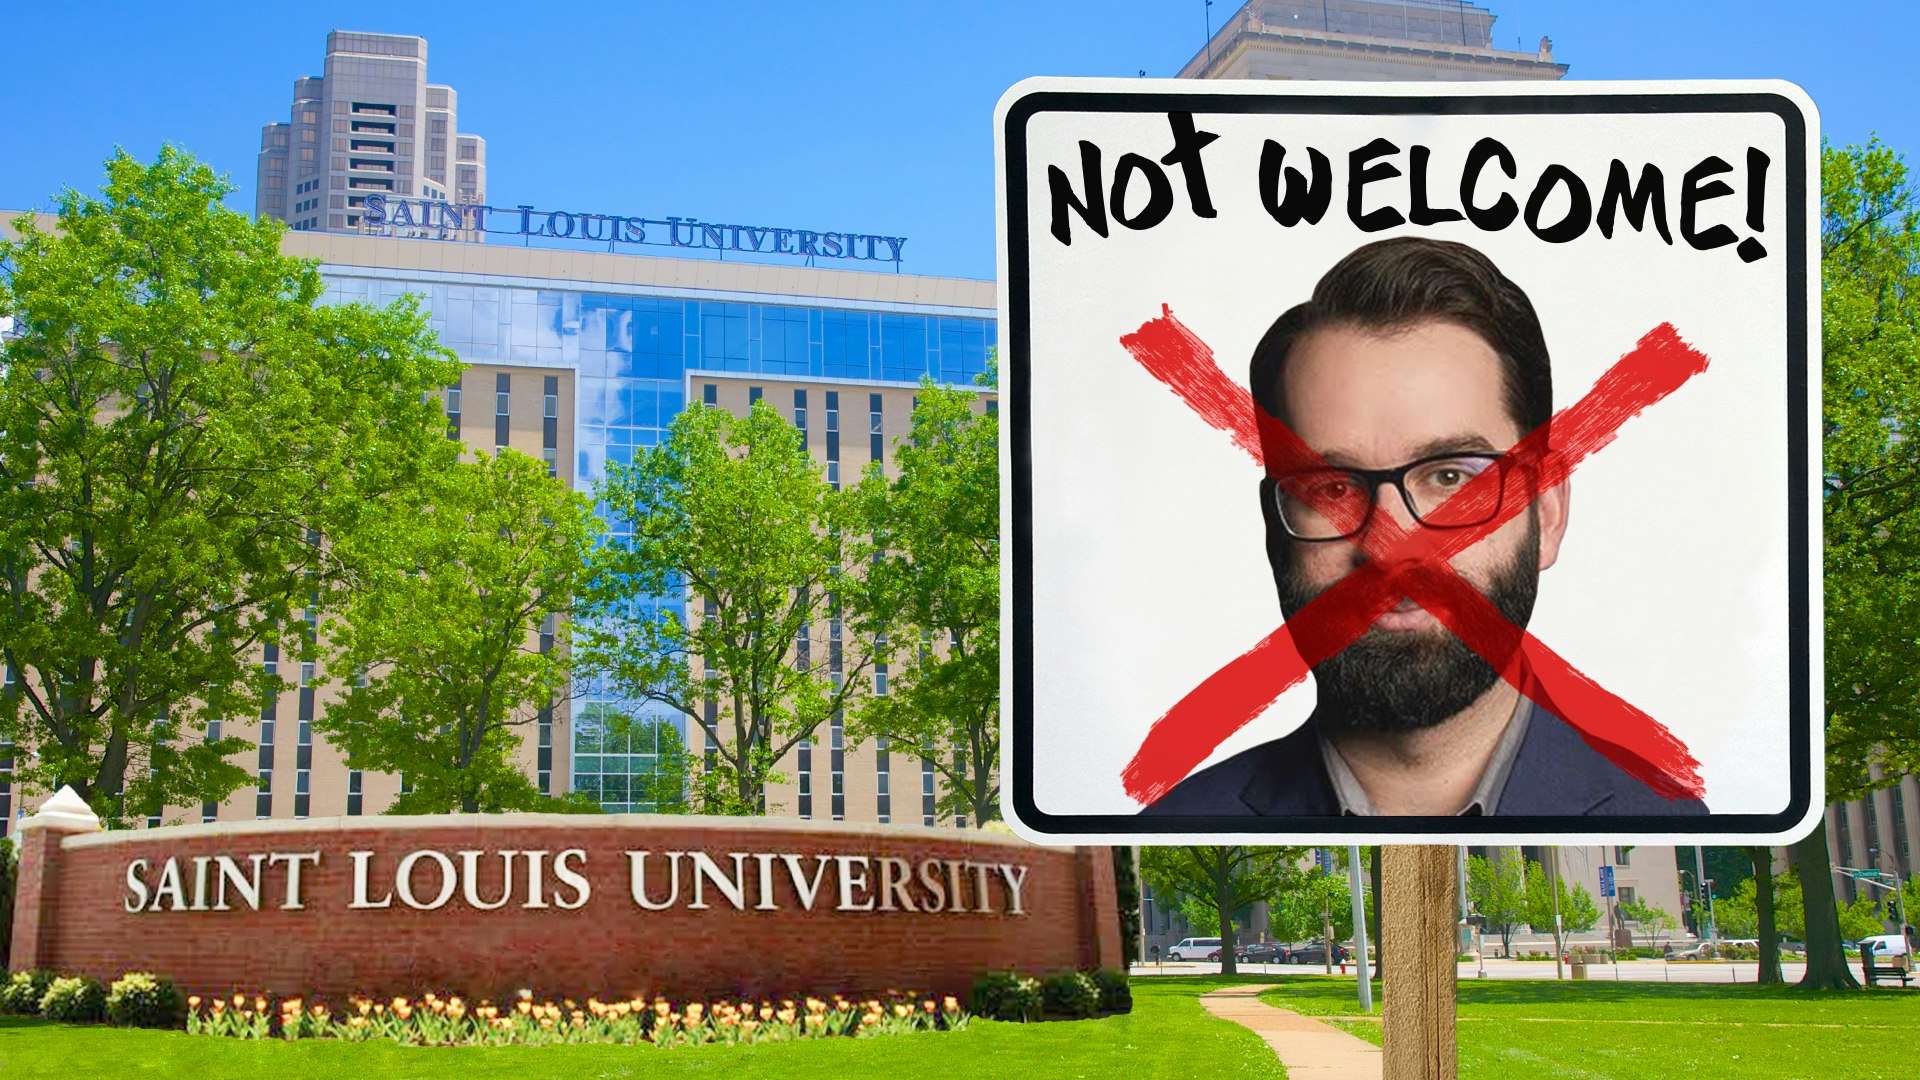 Ep. 848 - Bestselling Children’s Author Banned From College Campus